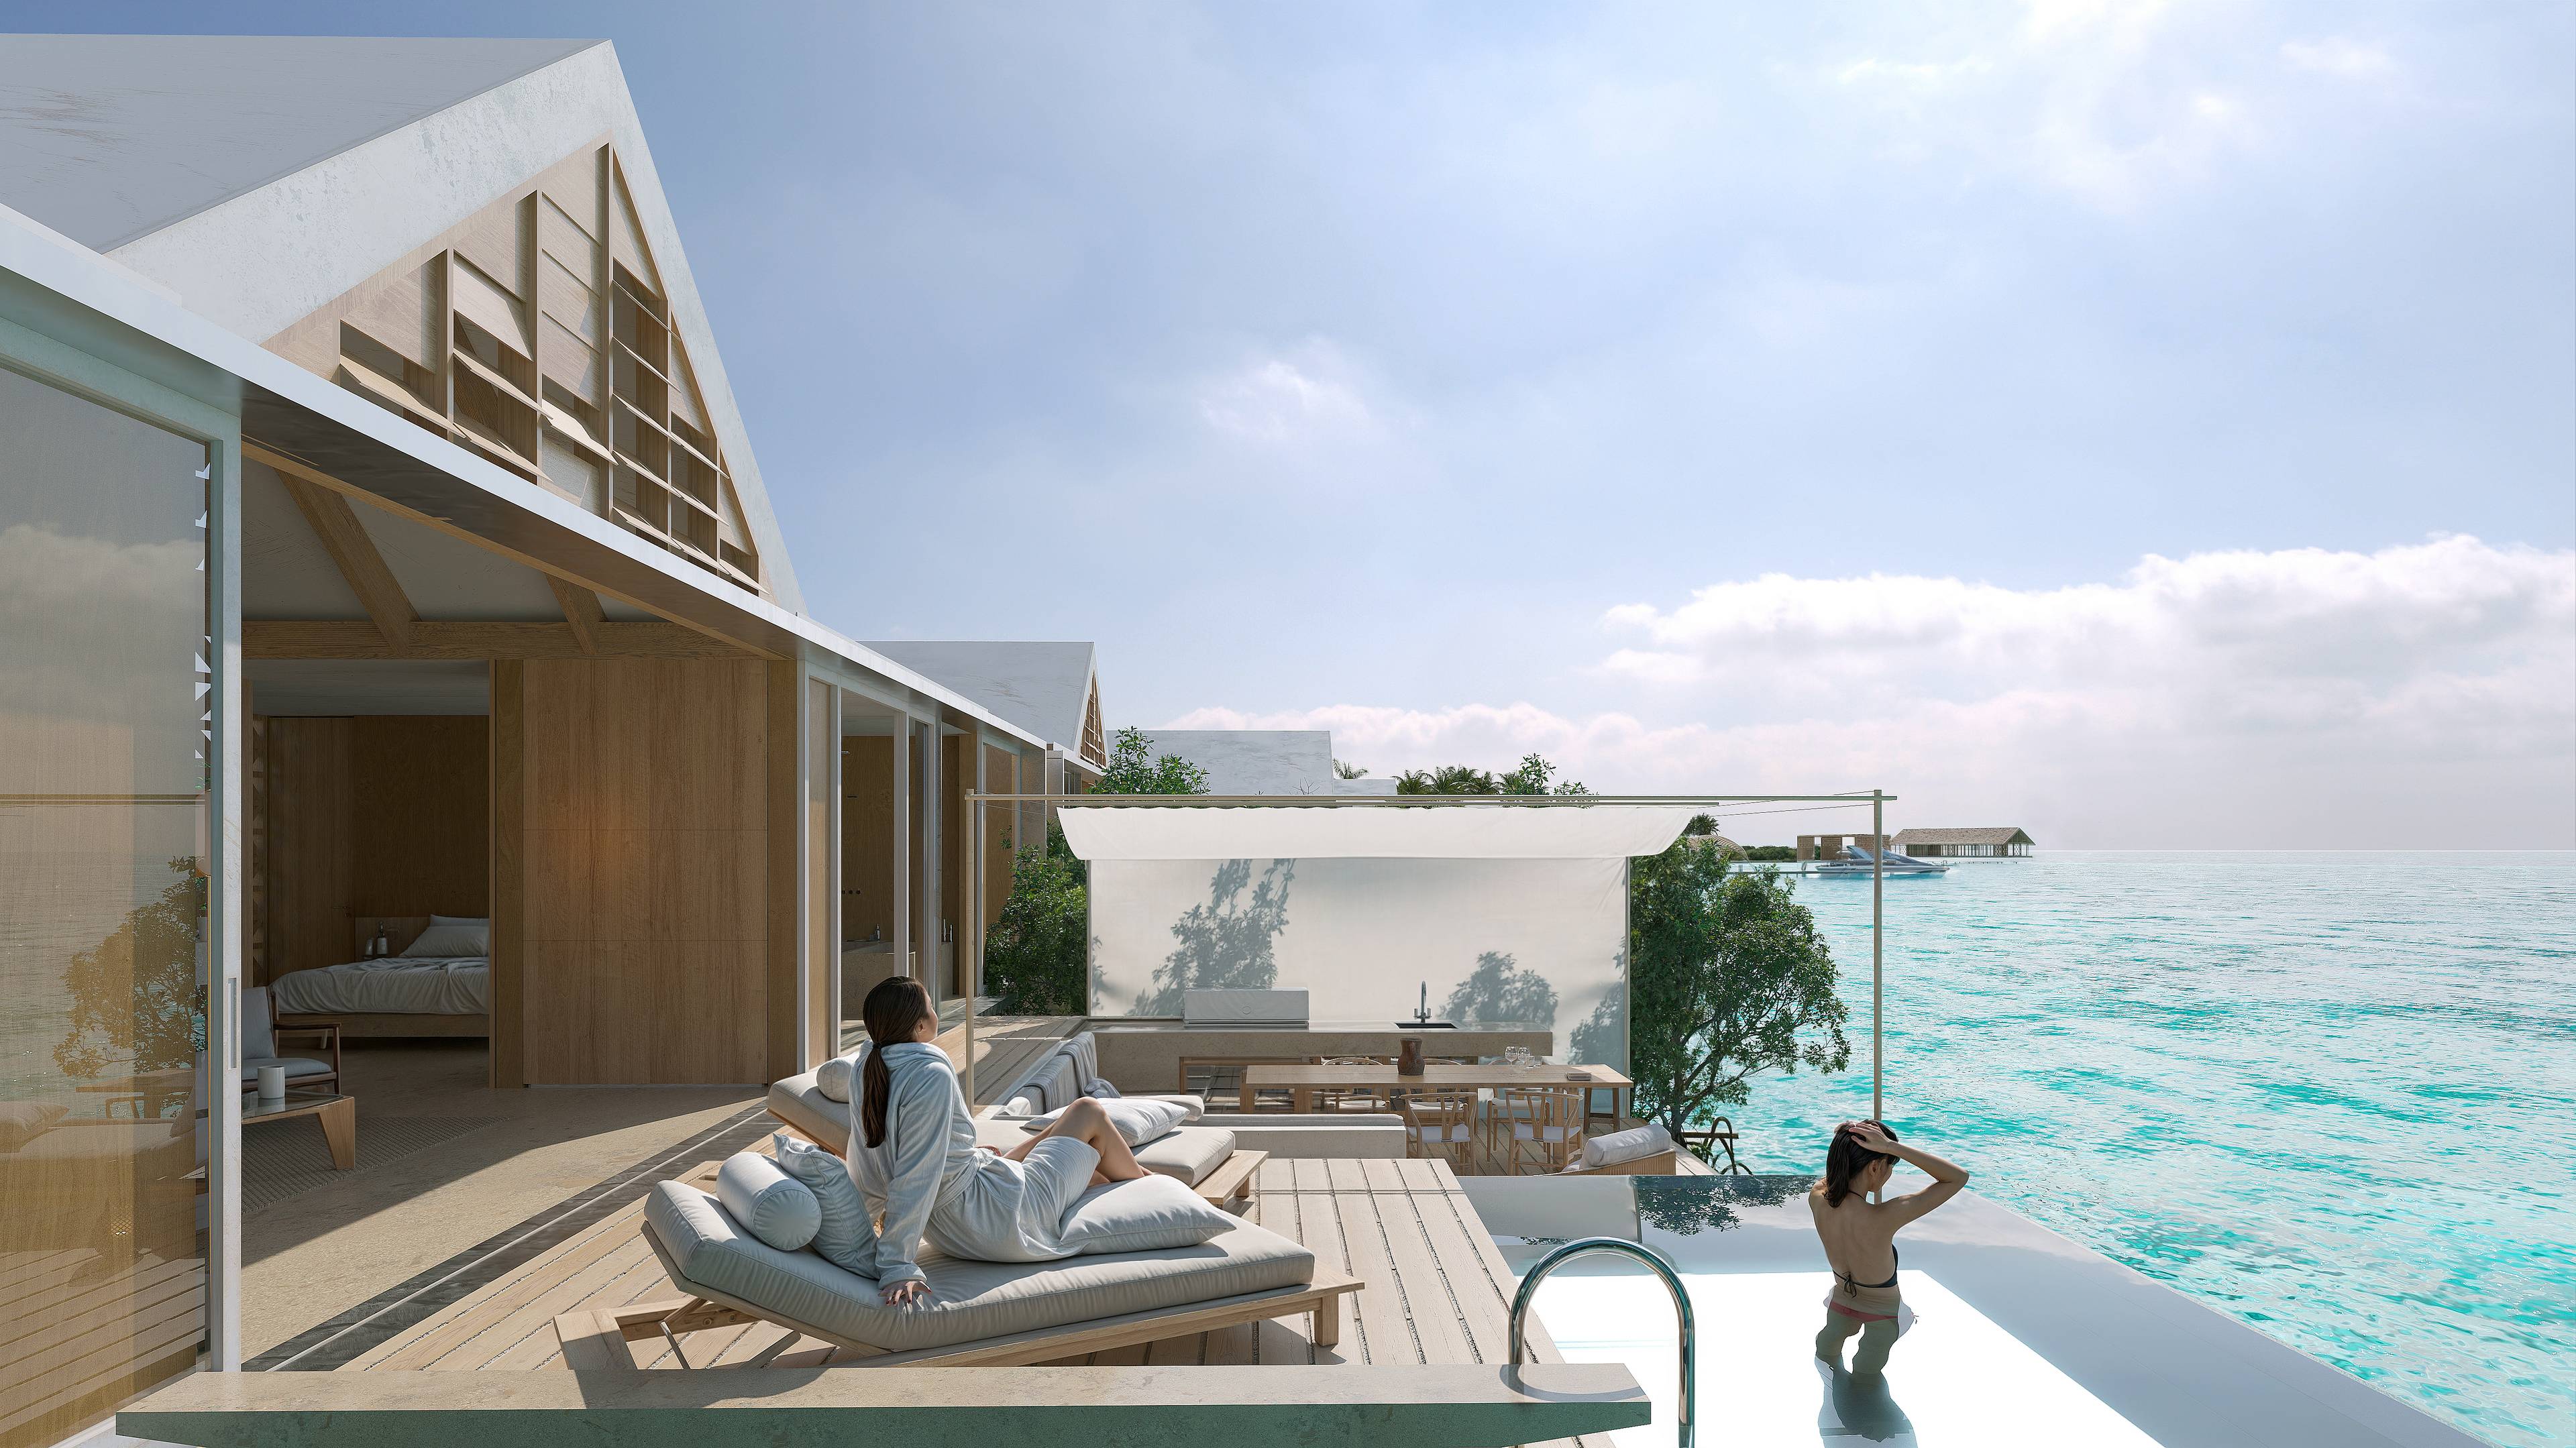 SIGNATURE TWO BEDROOM VILLA​​​​​​​ at the first Ultra Premium Residence-Resort in the Maldives Malé Atoll